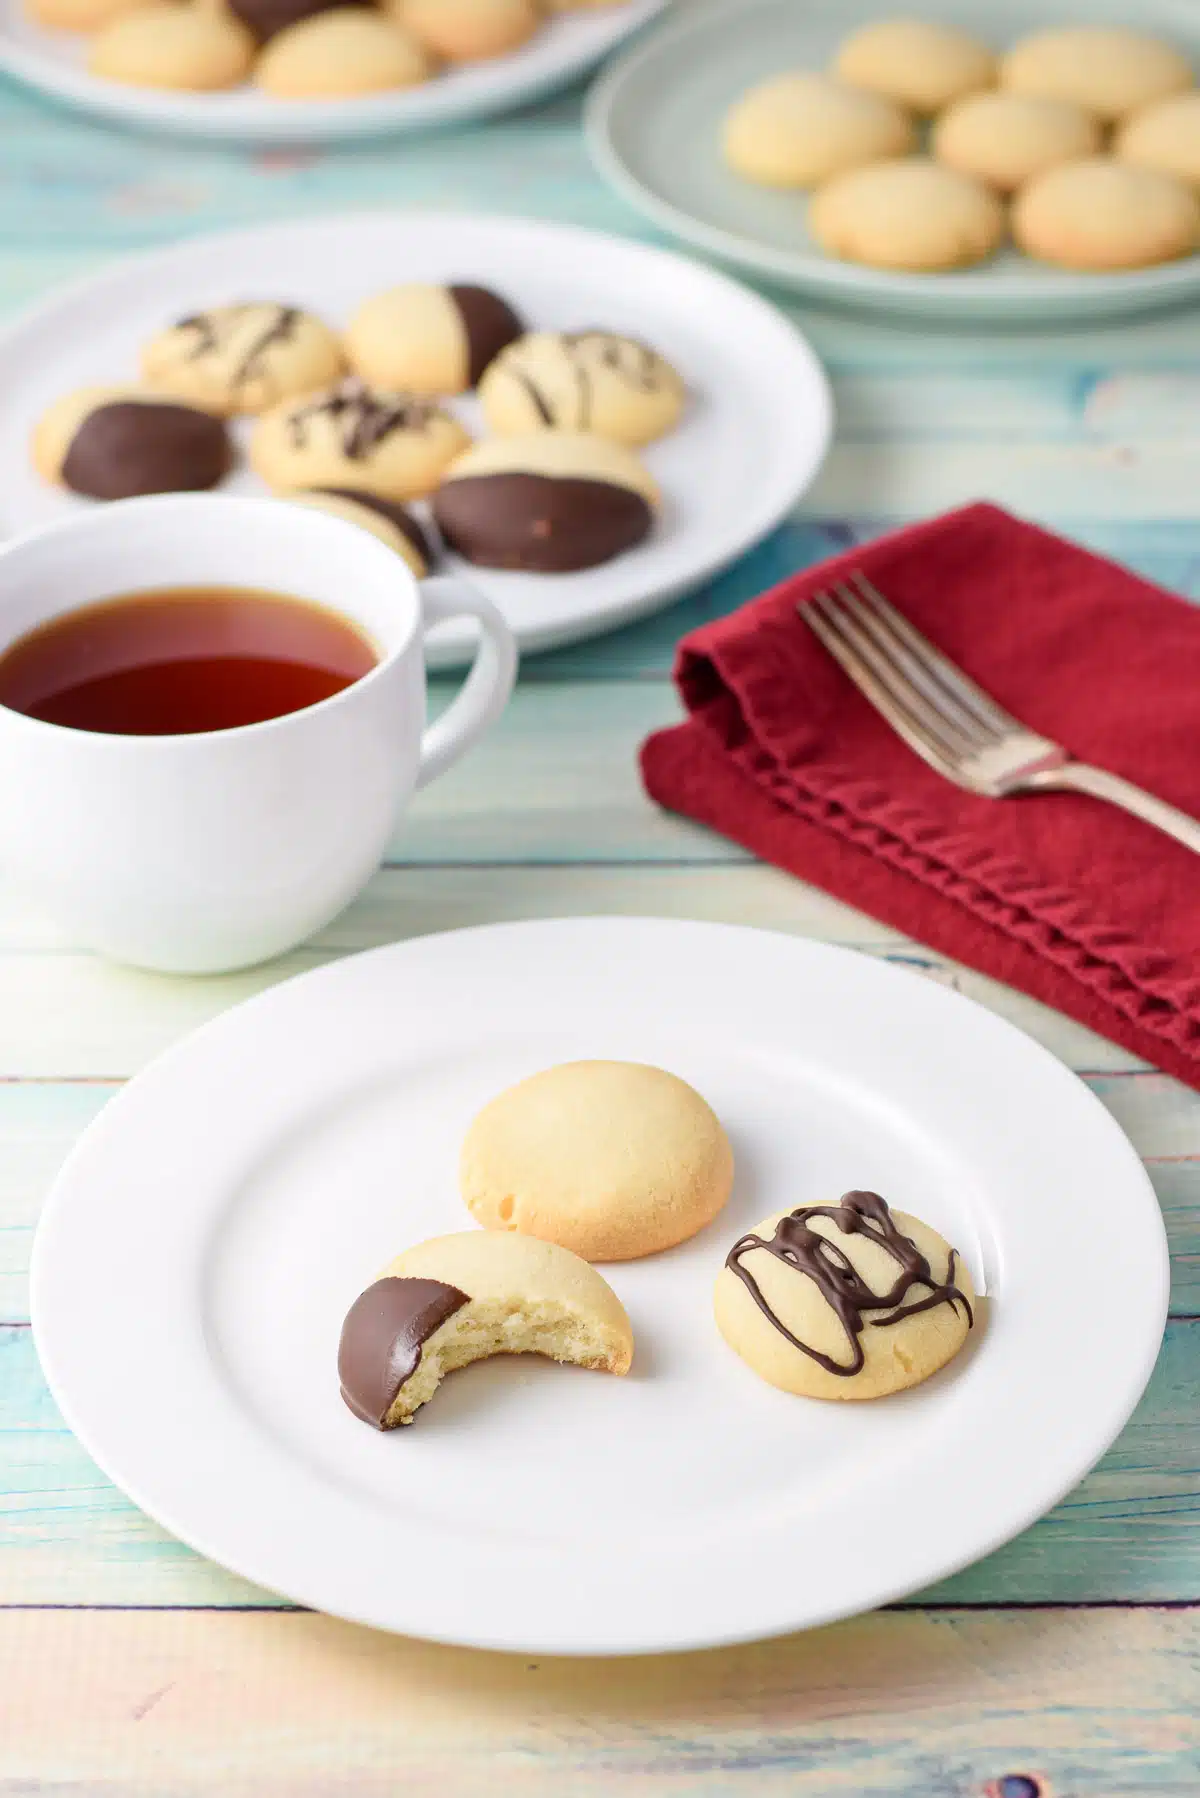 A white plate with 3 cookies on it with a bite out of one of them. There are other plates of cookies in back with a cup of tea